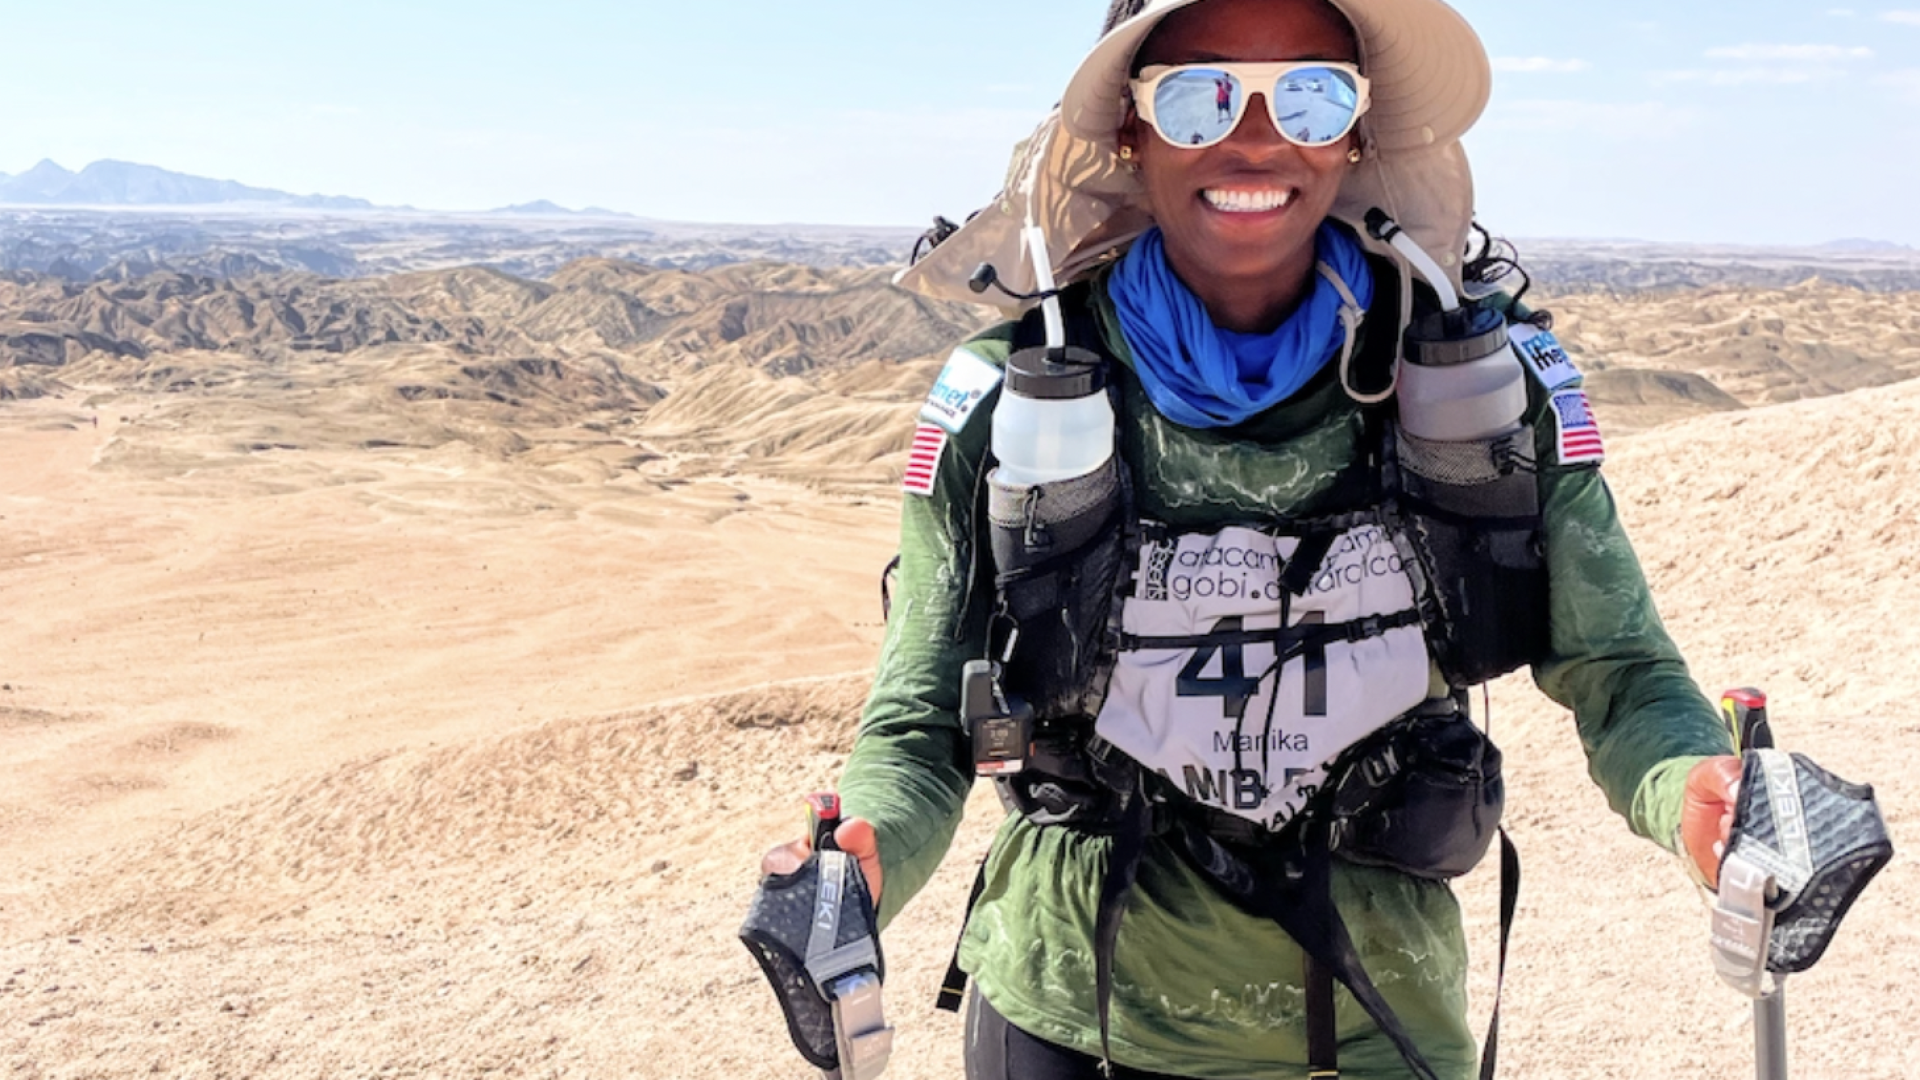 Manika Gamble Just Became The First Black Woman To Conquer Namibia's 155-Mile Race